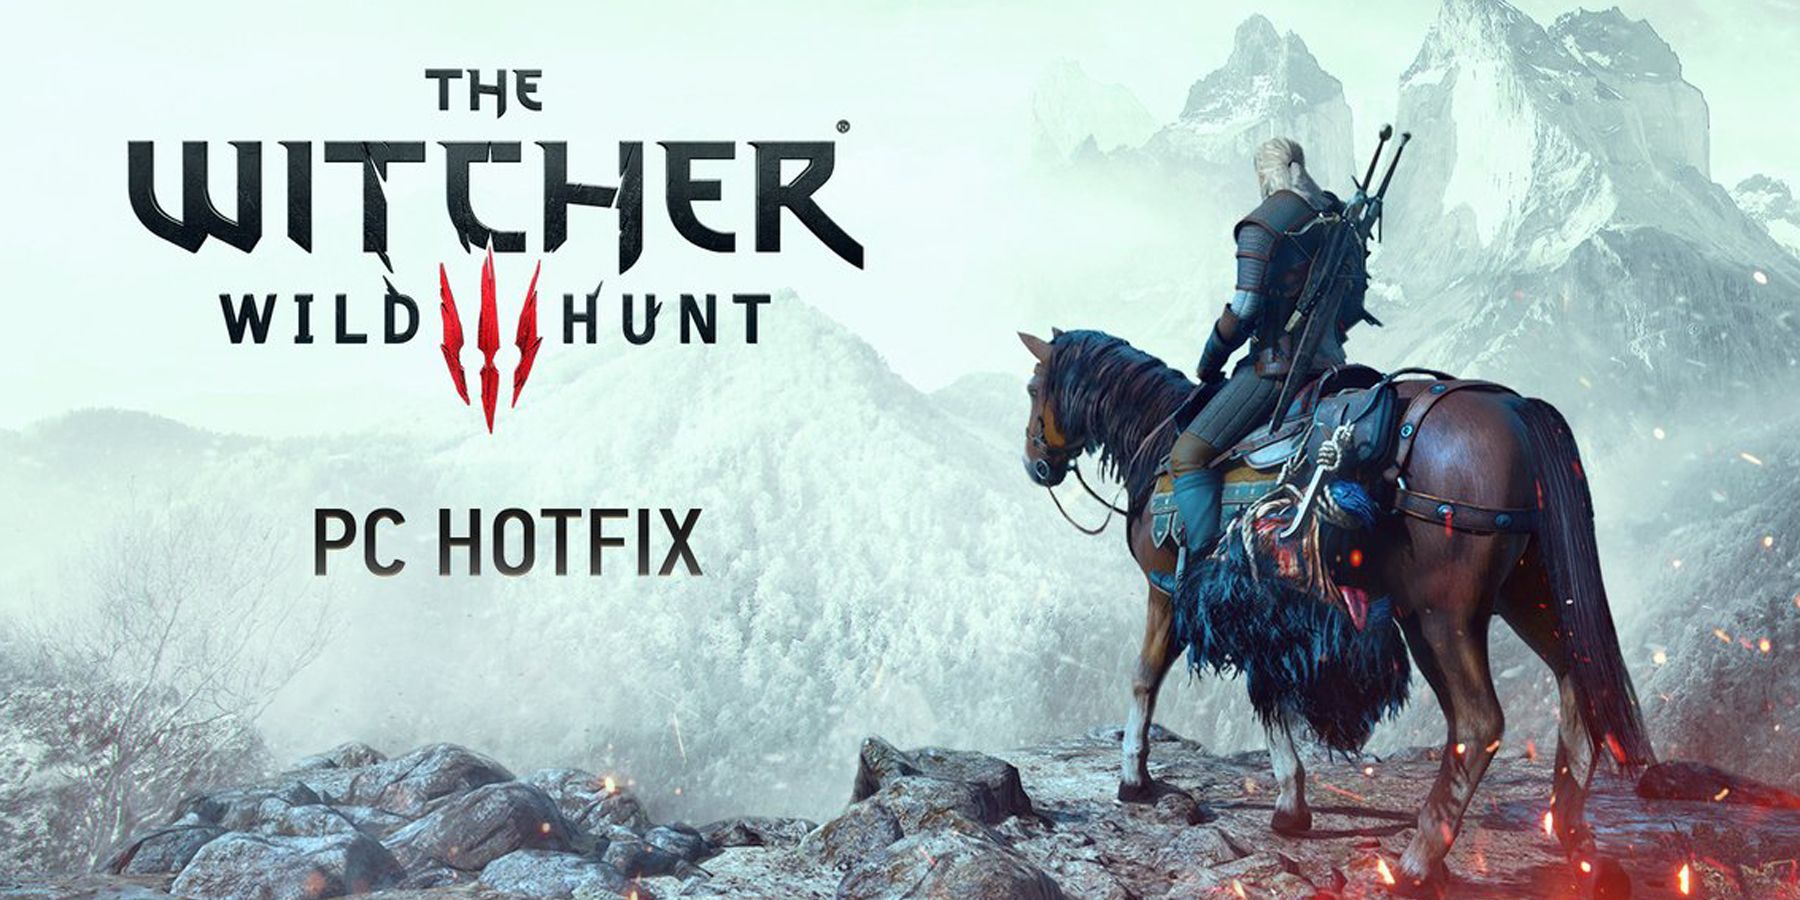 The Witcher 3: Wild Hunt PC patch